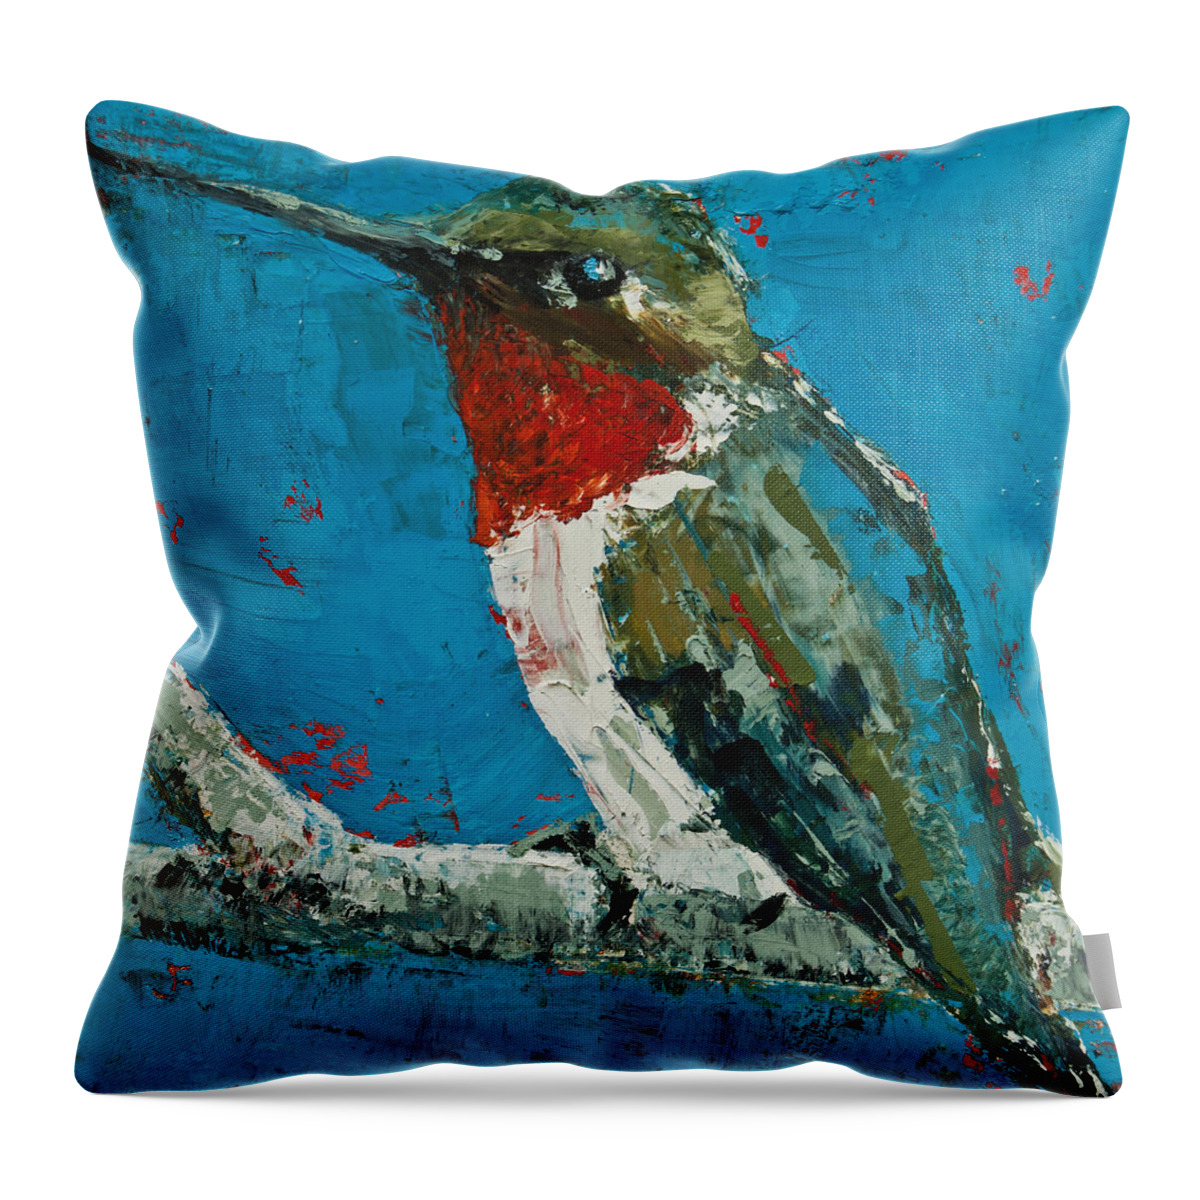 Hummingbird Throw Pillow featuring the painting Ruby-Throated Hummingbird by Jani Freimann